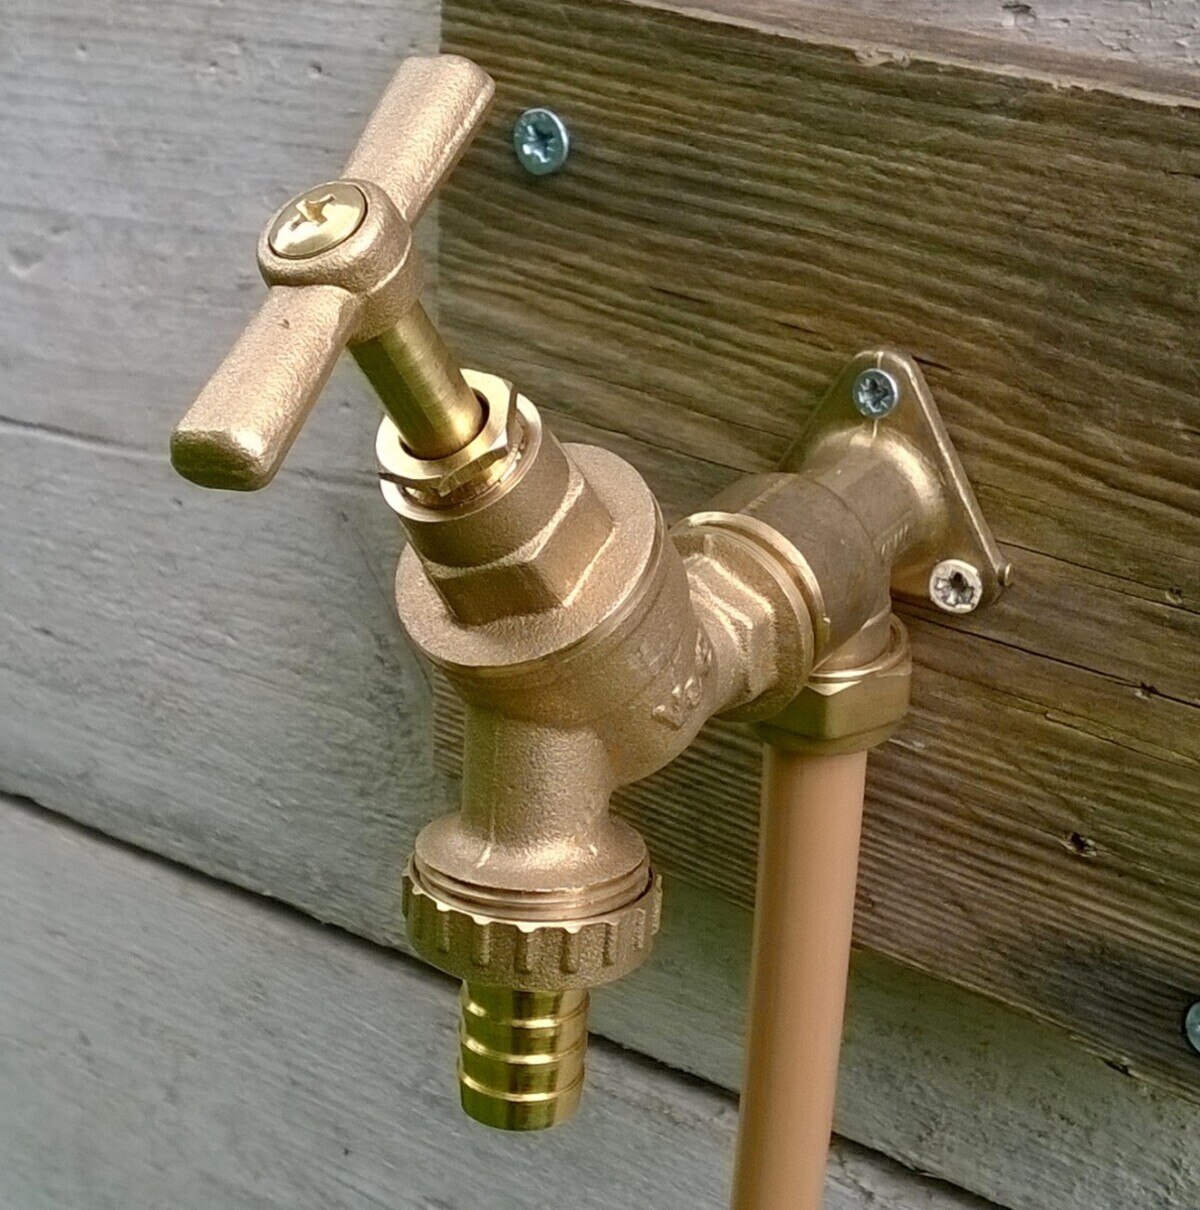 How To Repair A Leaking Outdoor Faucet